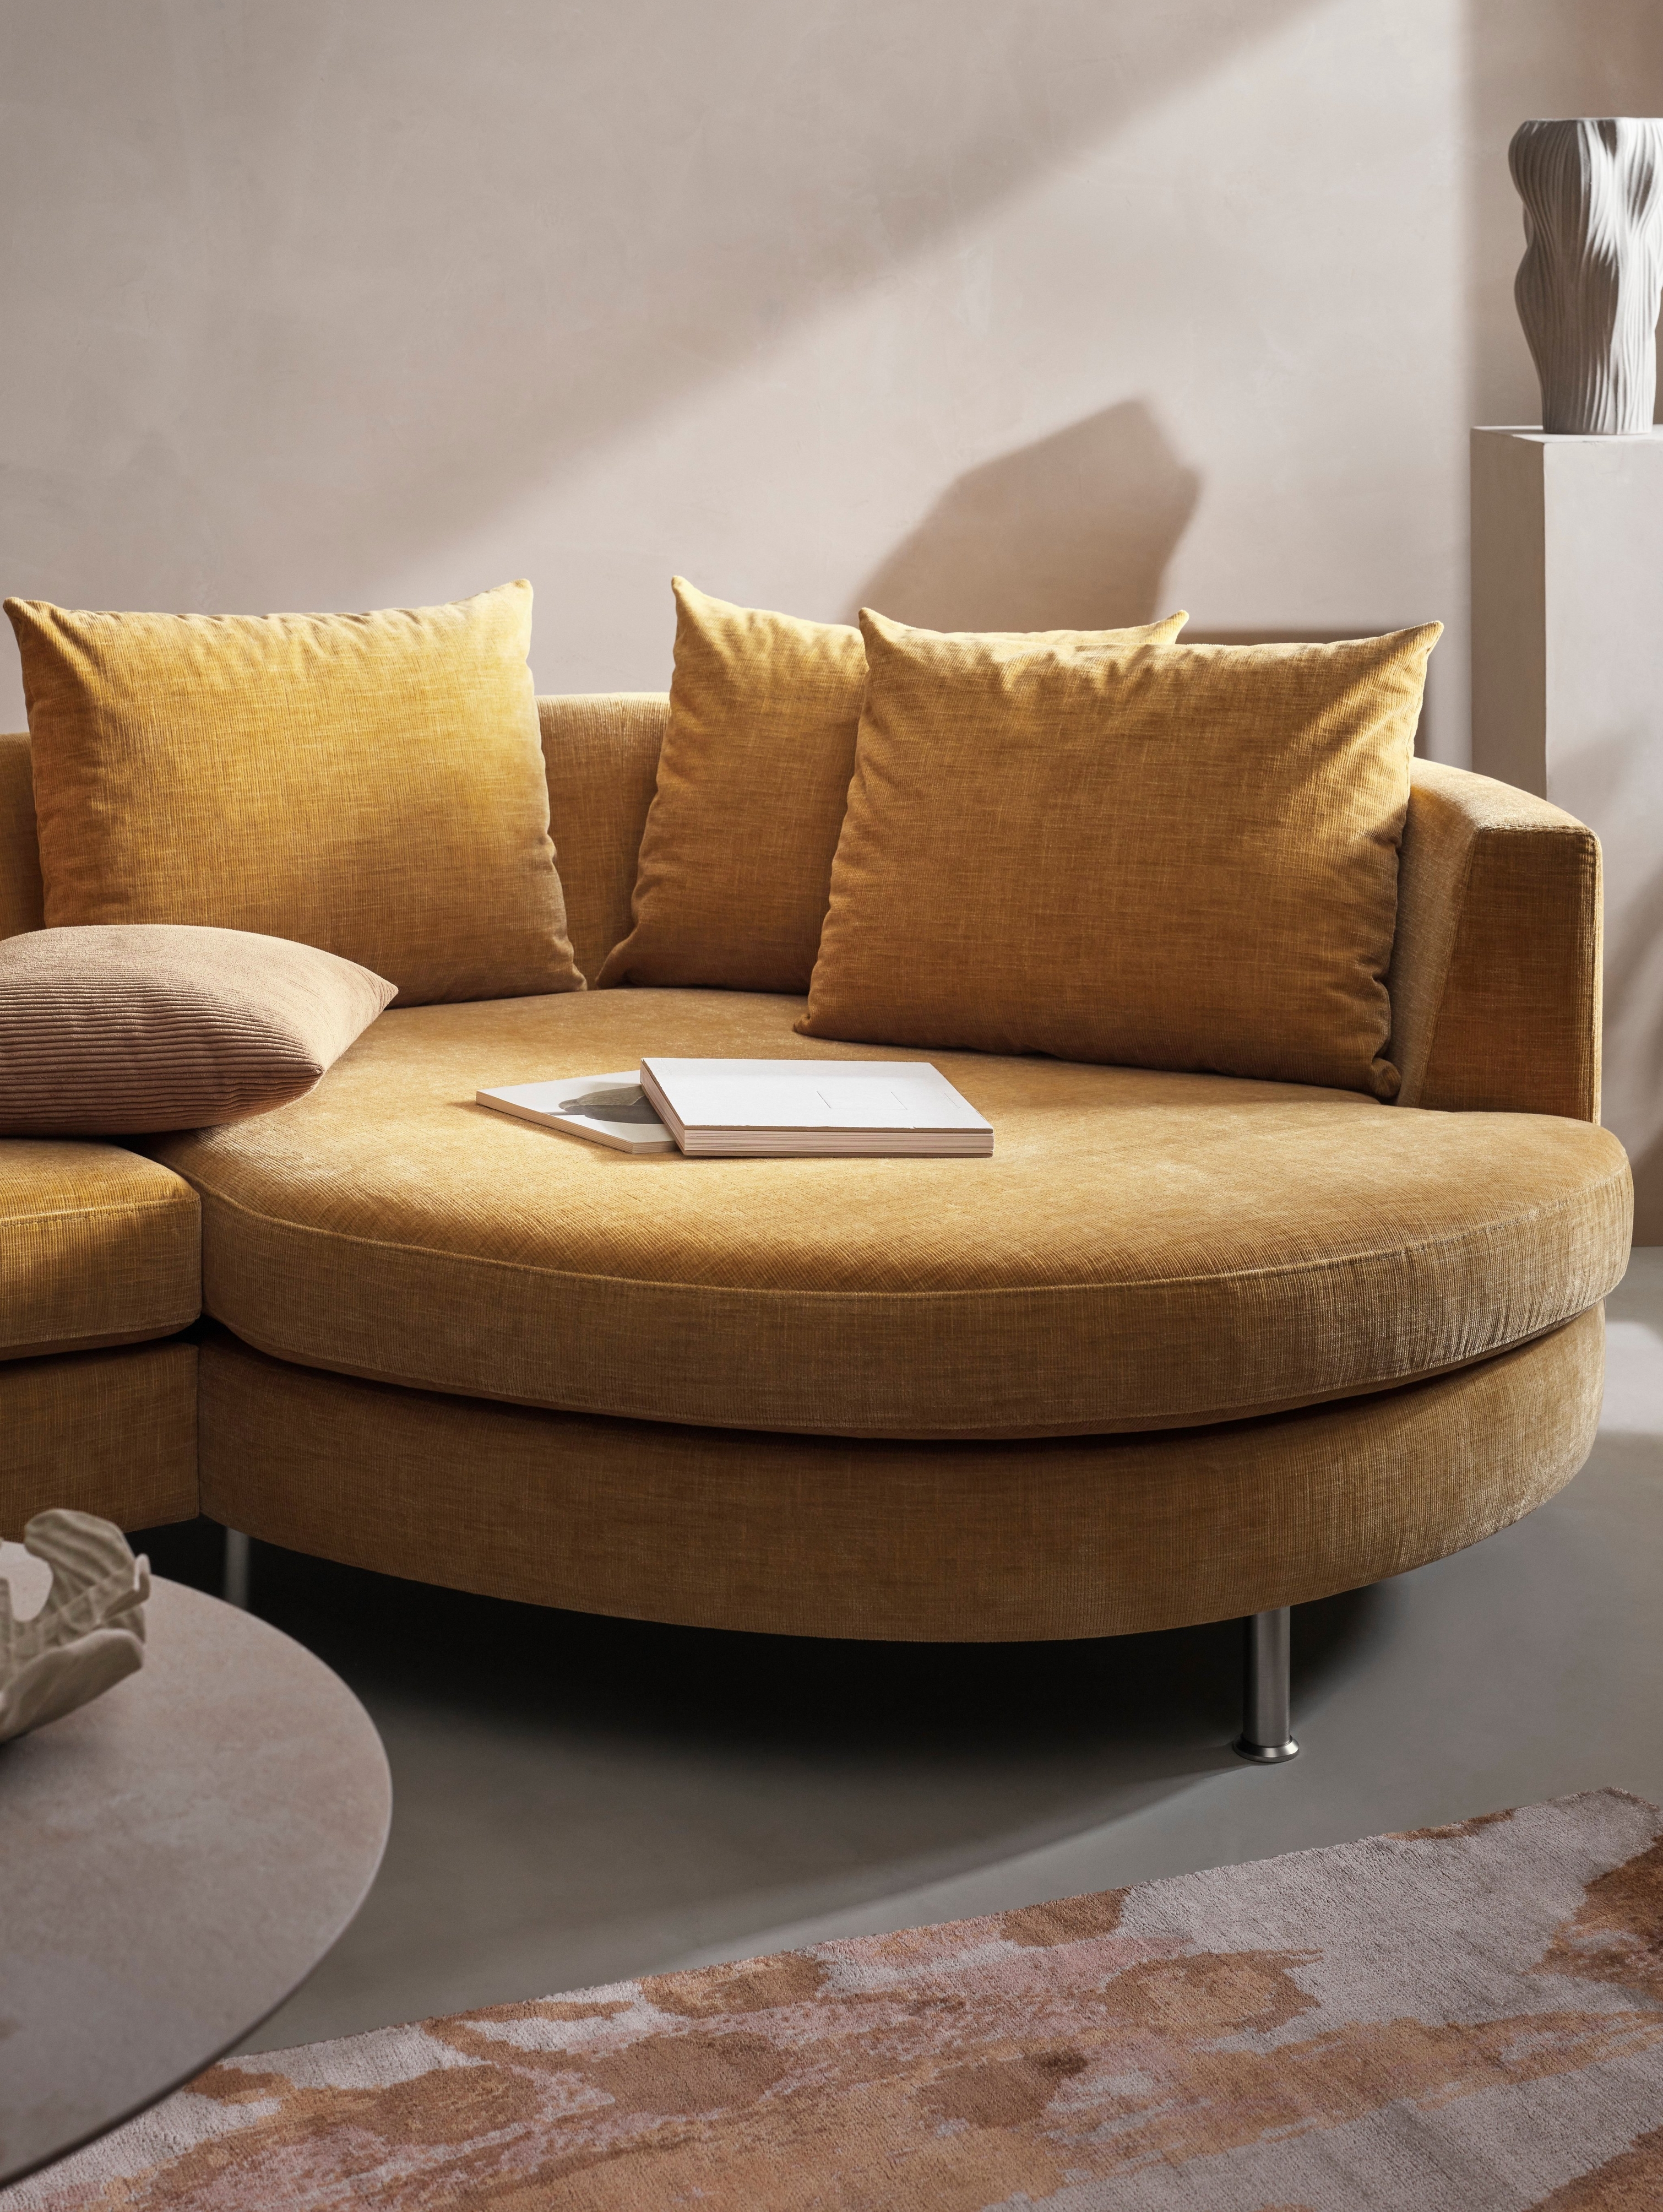 The Indivi sofa round resting unit, perfect for a relaxing day after work.